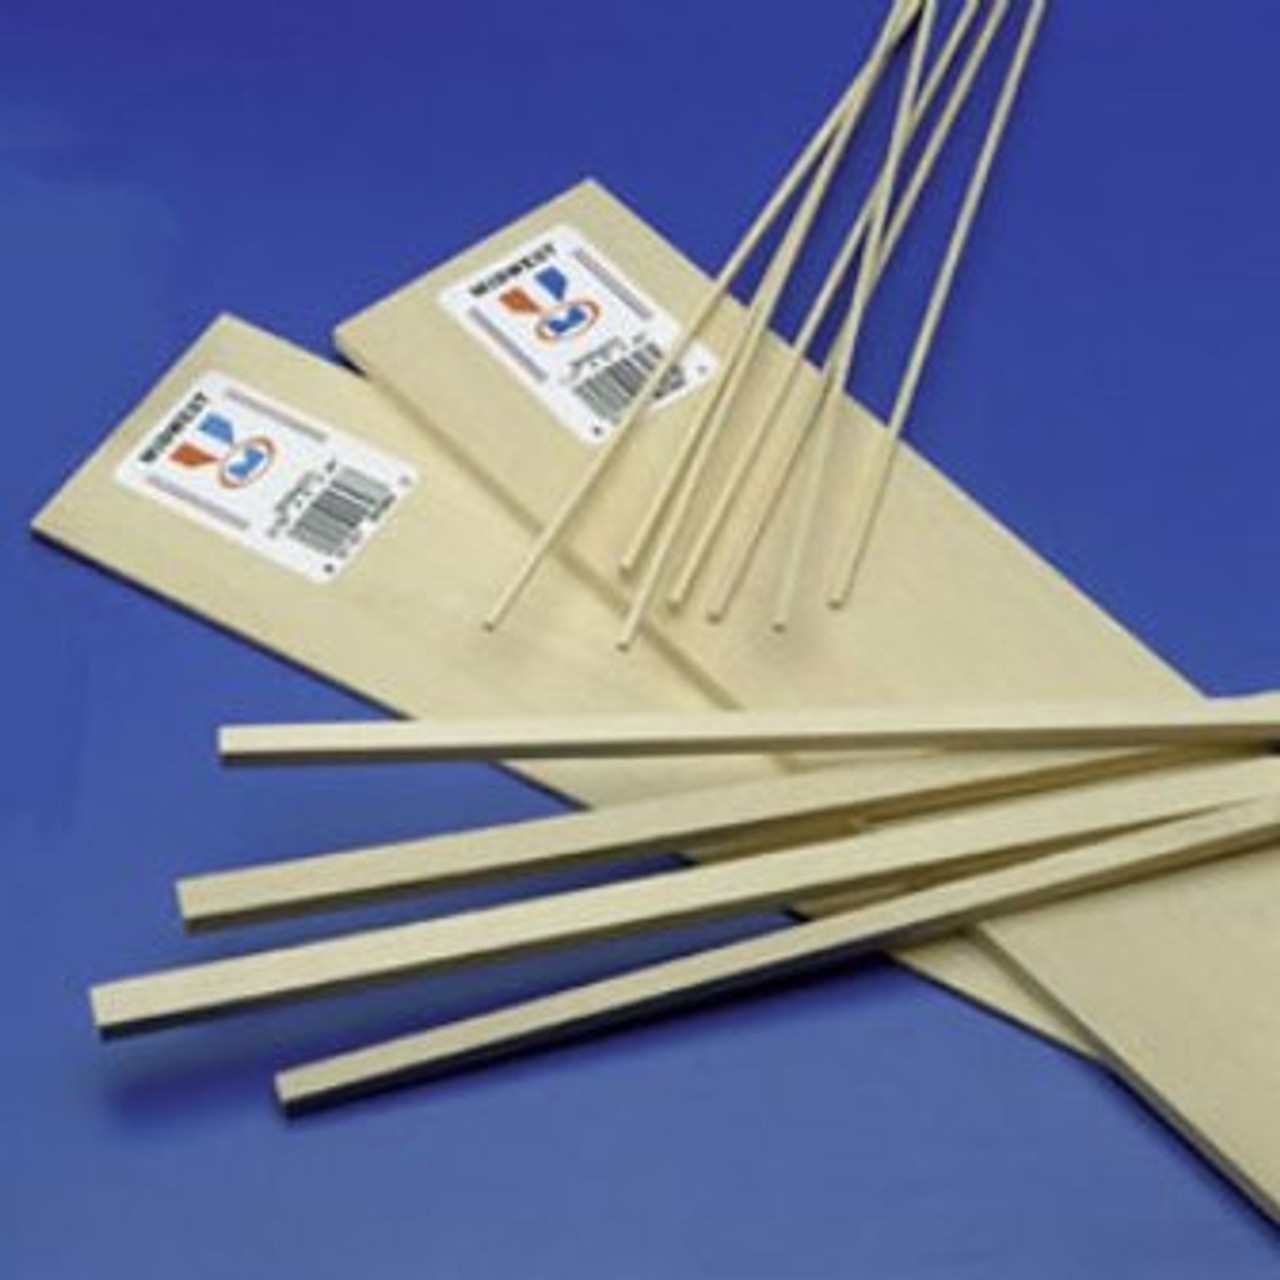 Photograph of assorted wood strips and sheets